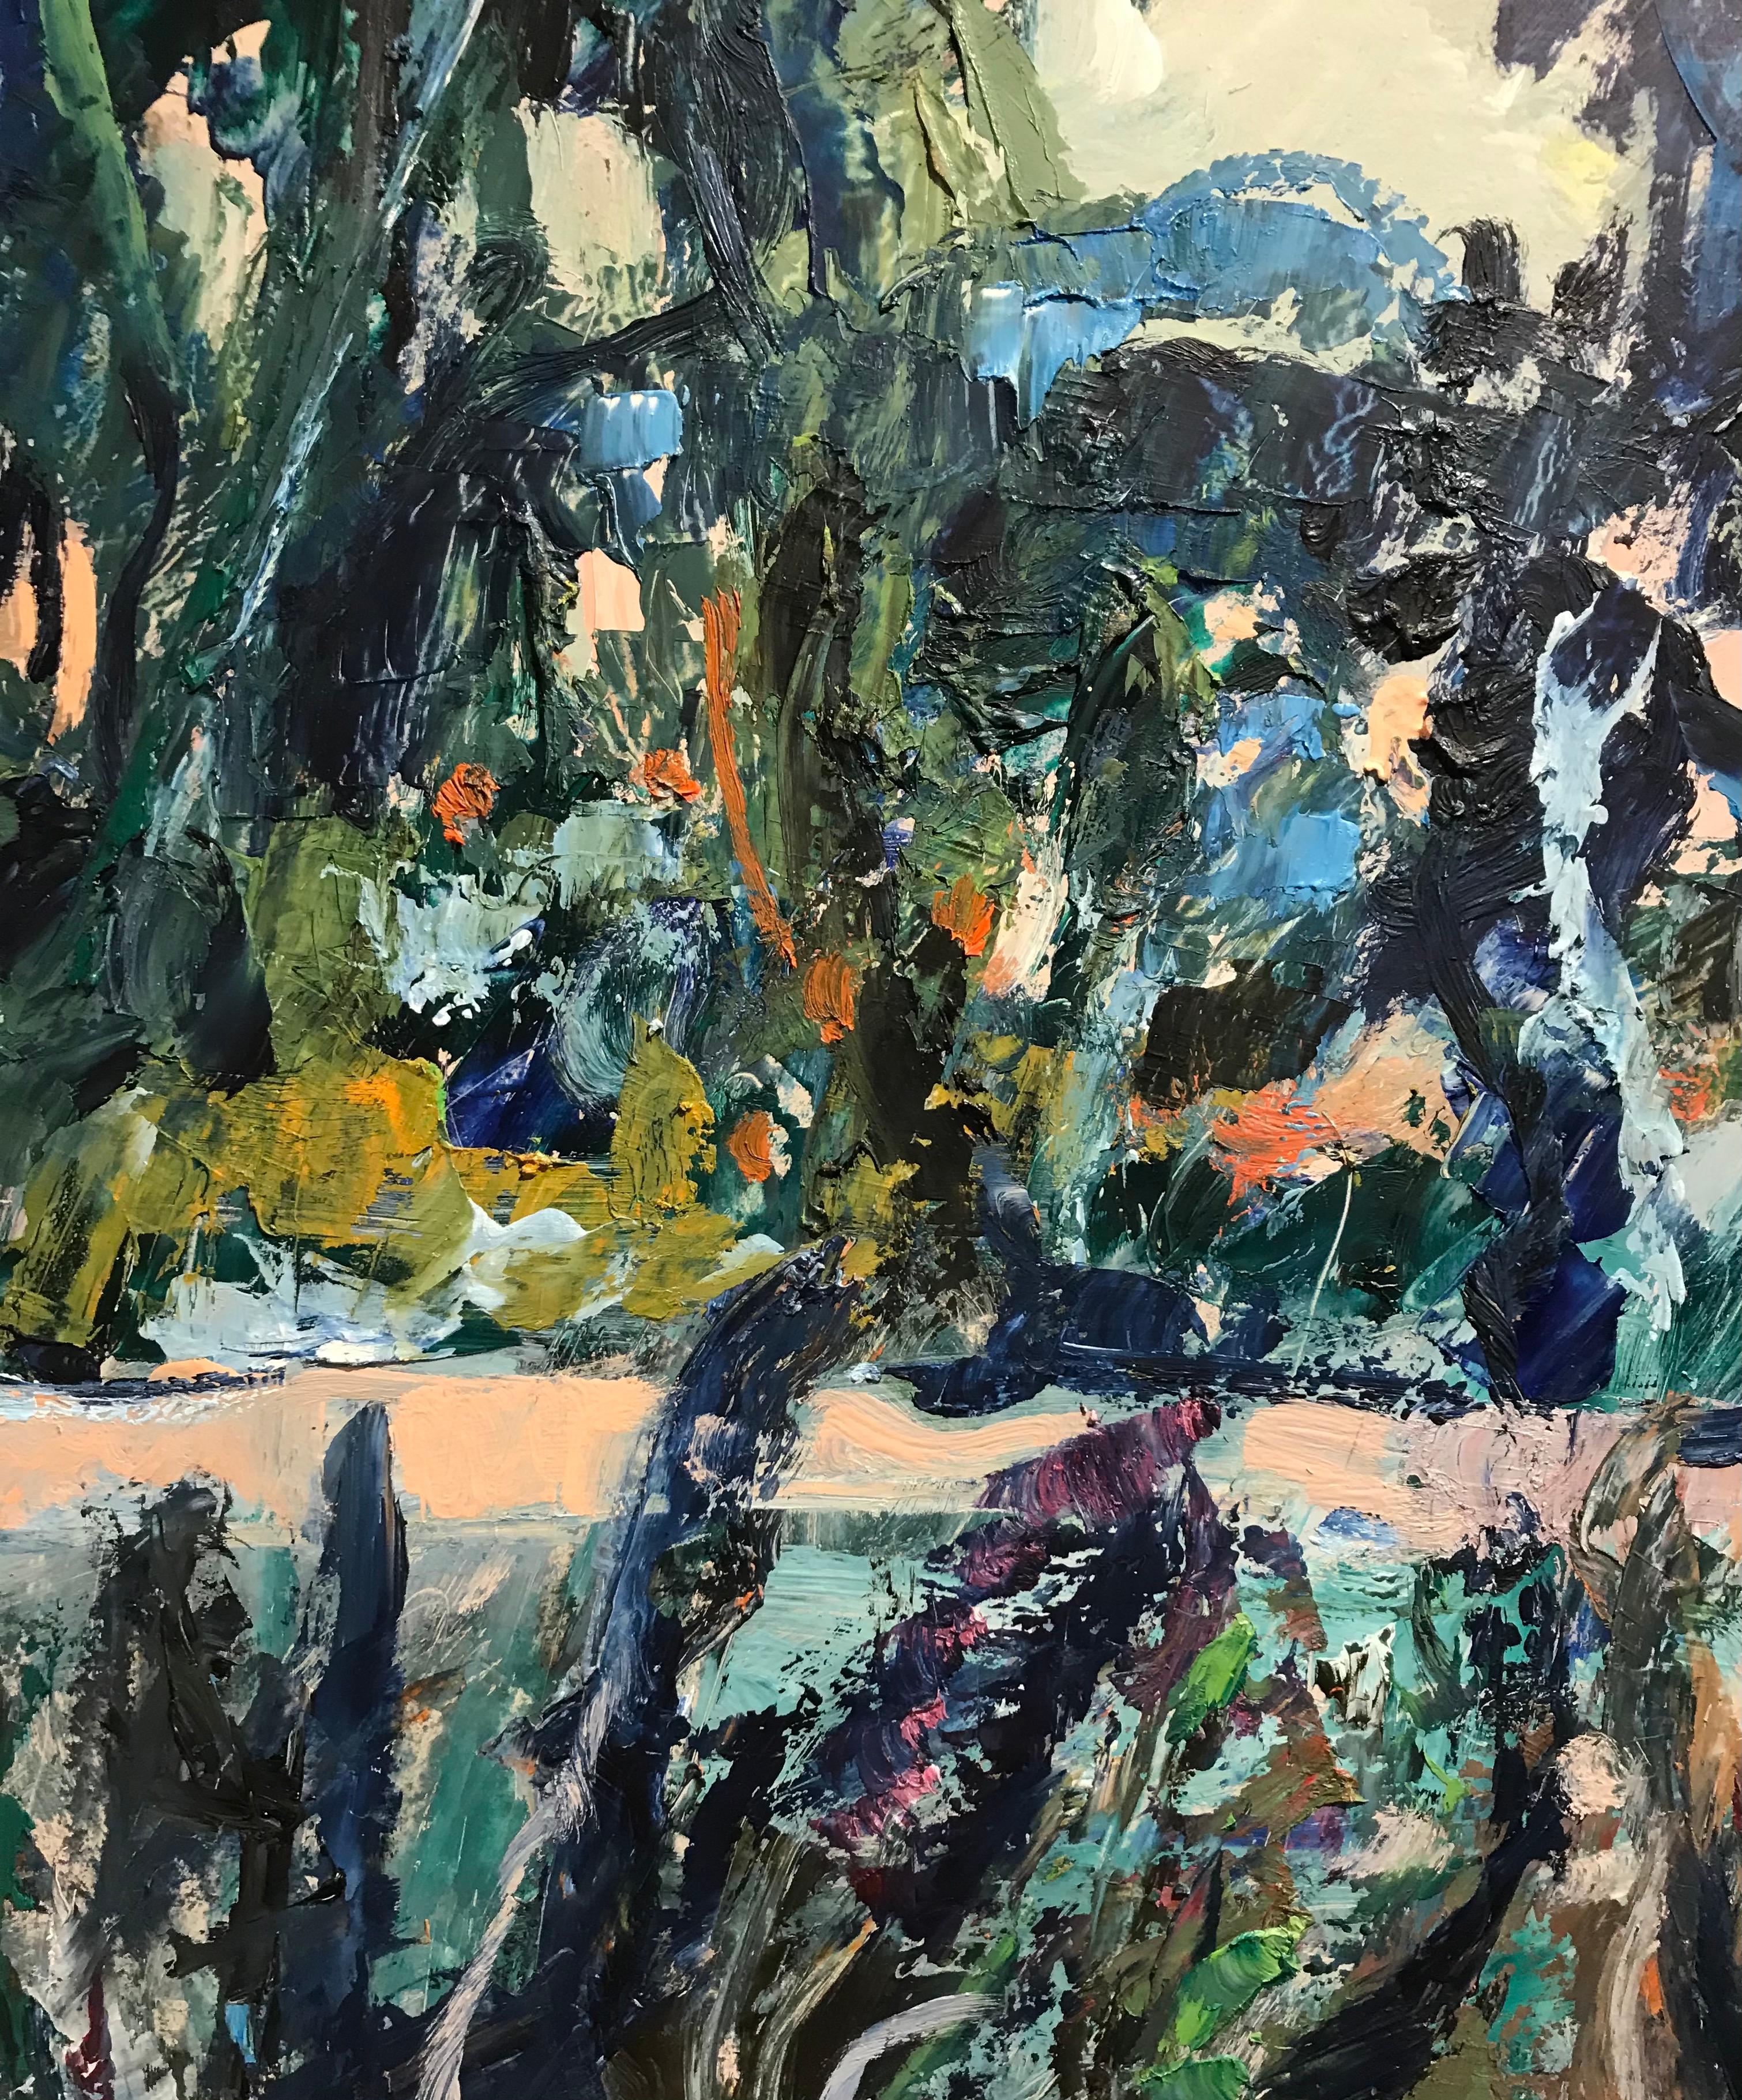 Forest n°2 by Jean Krillé - Oil on wood 65x92 cm - Abstract Expressionist Painting by Jean Krille